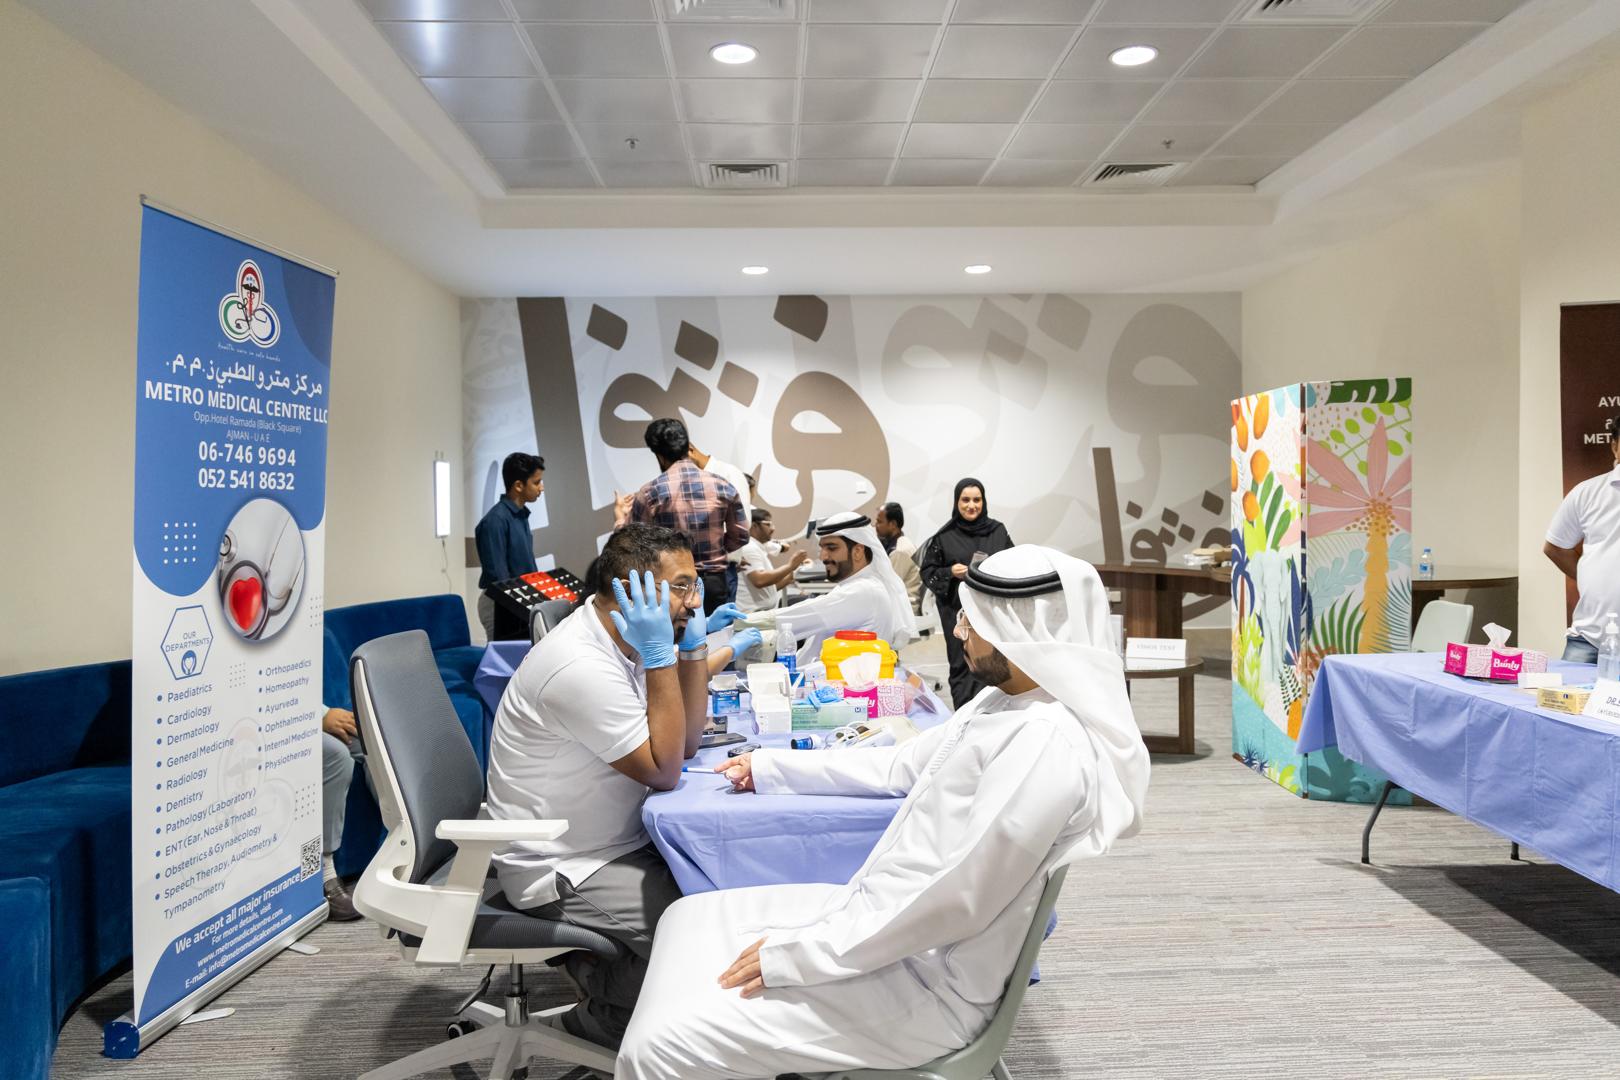 ''Your health is our main concern' - a health initiative by the Ajman Chamber"